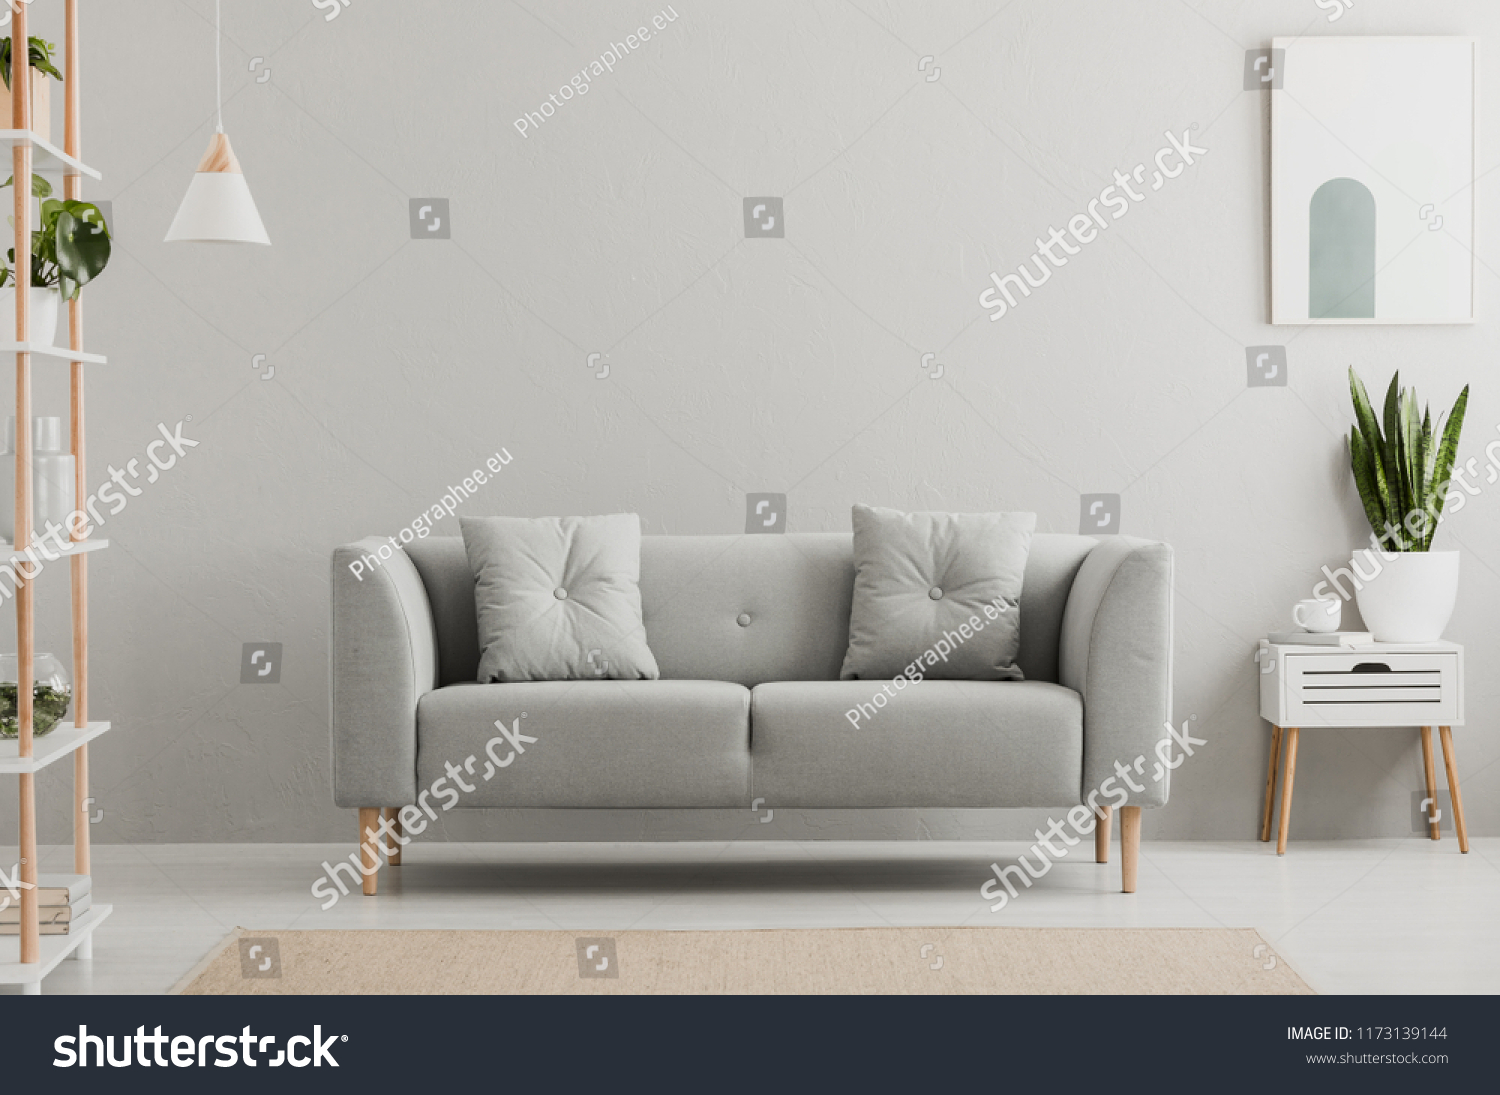 Poster above white cabinet with plant next to grey sofa in simple living room interior. Real photo #1173139144